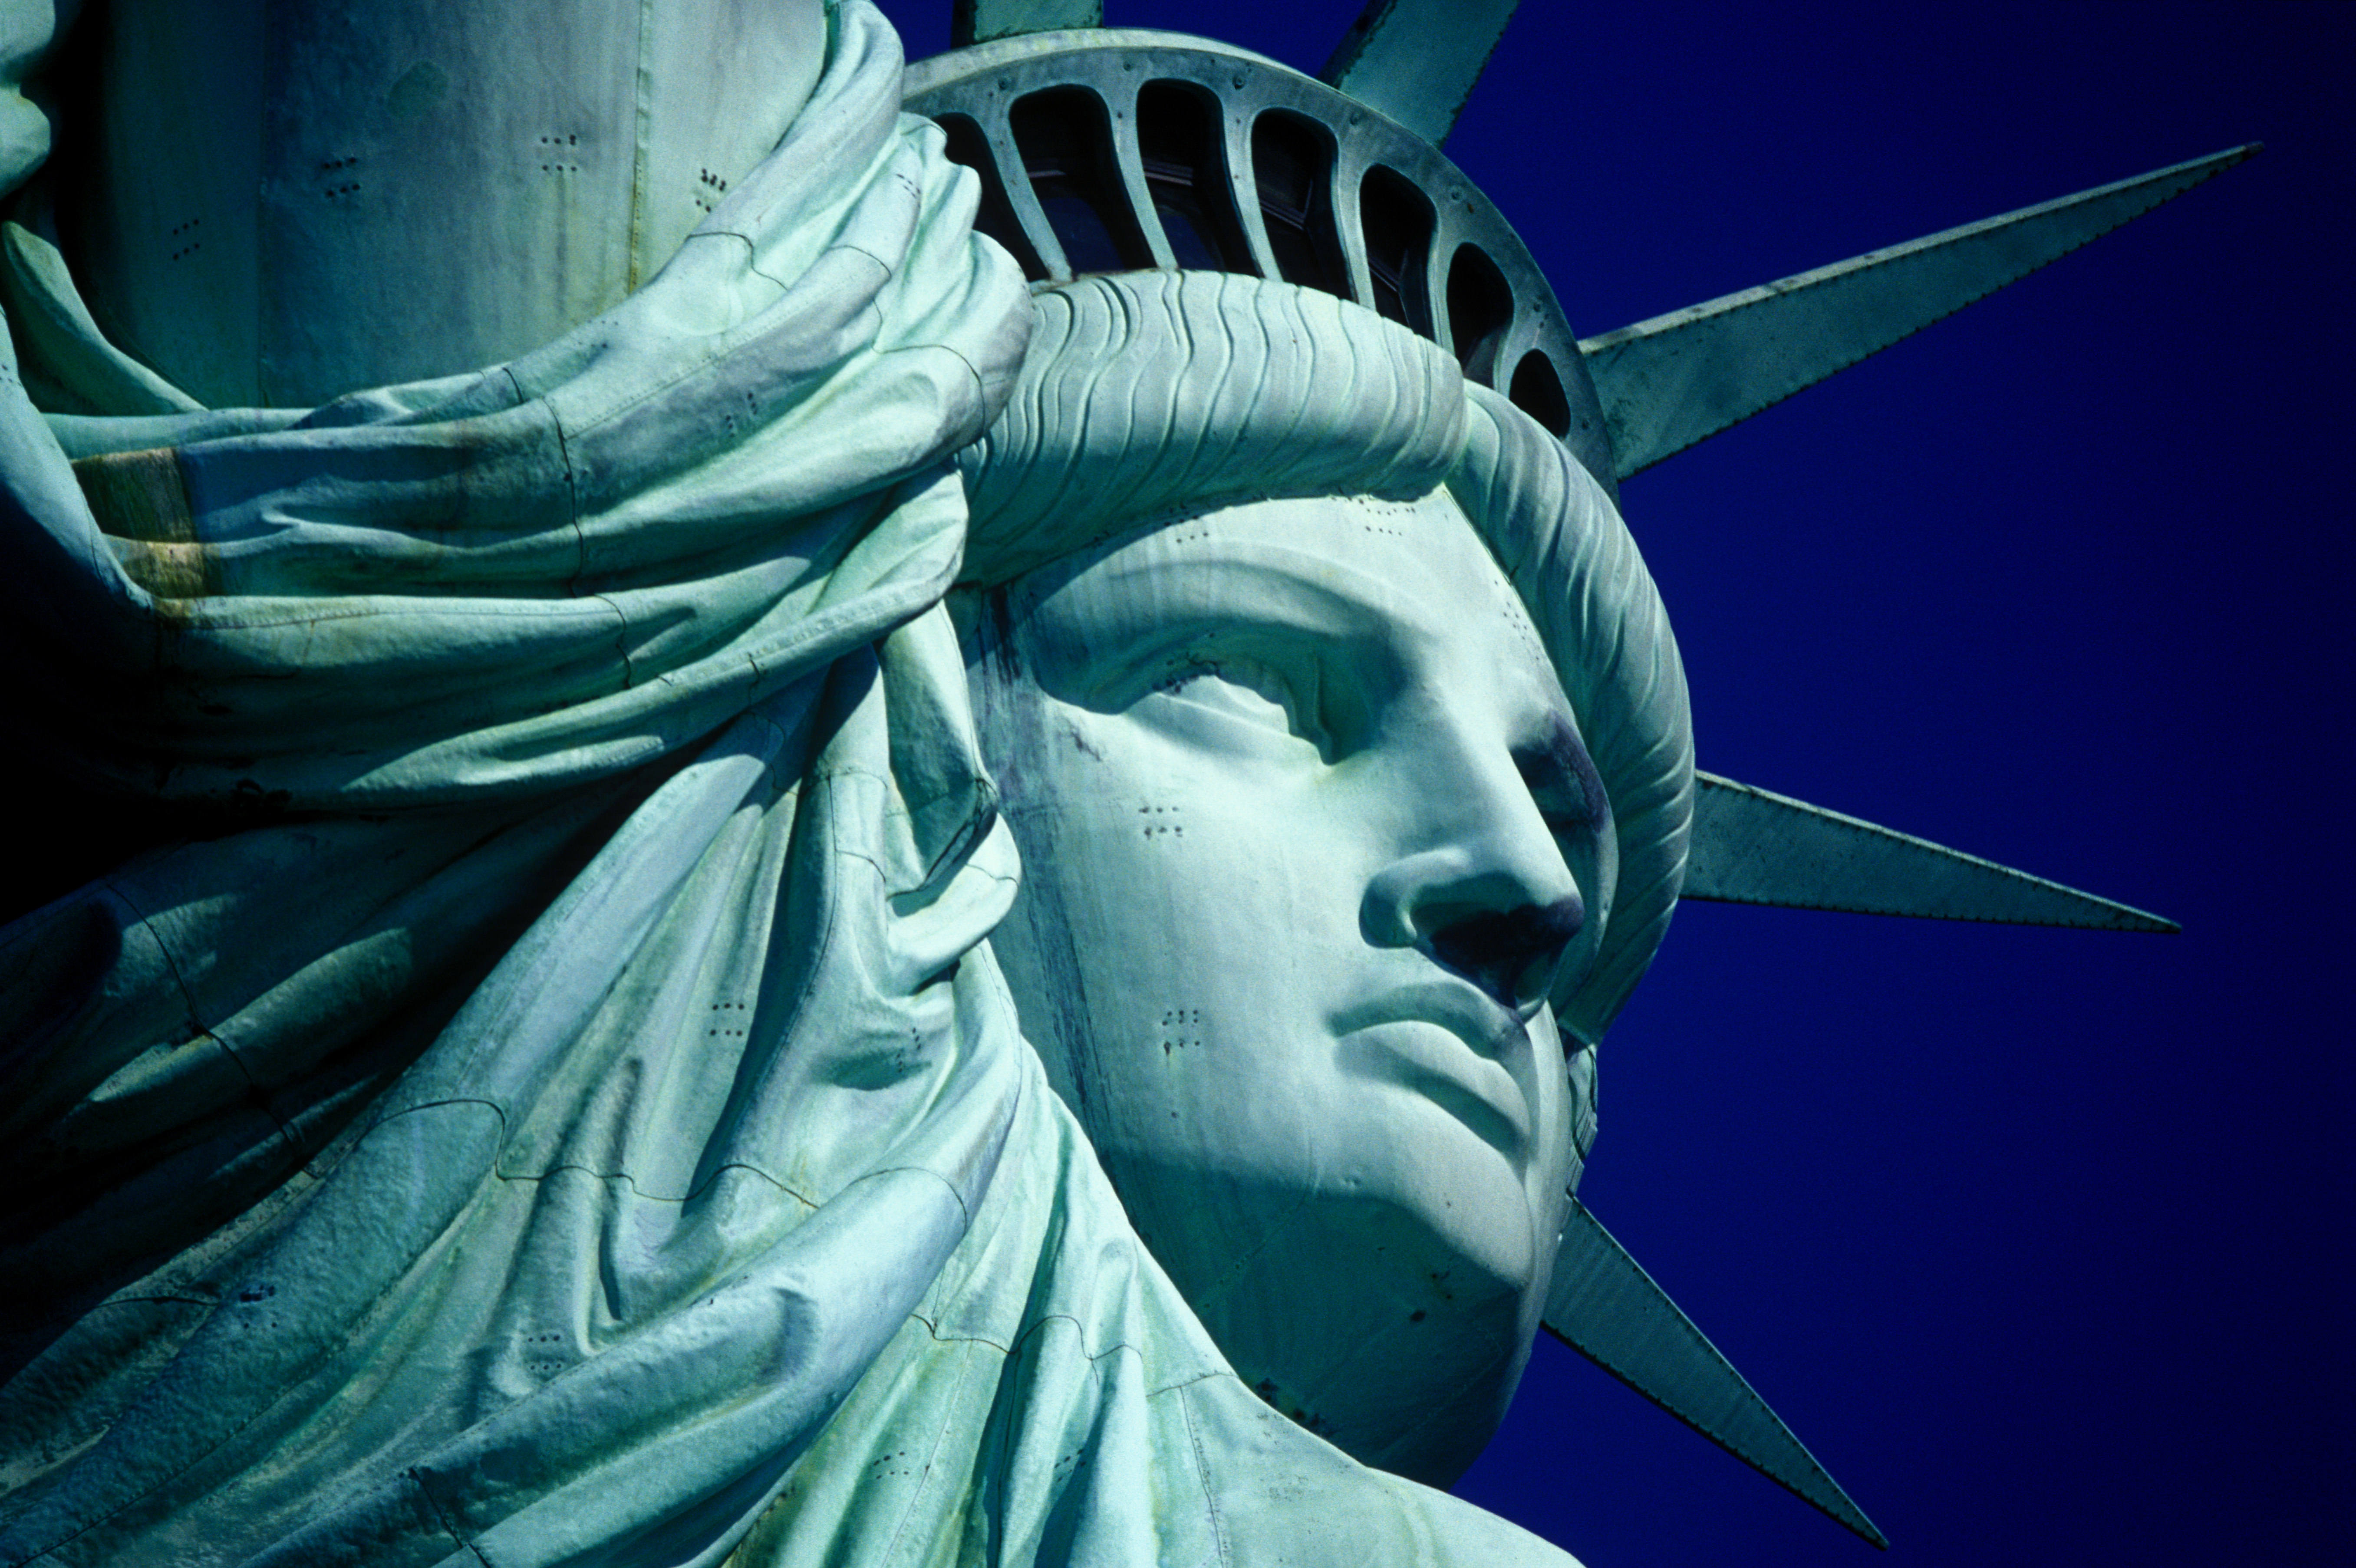 Ever wondered why the Statue of Liberty is that green-blue color?